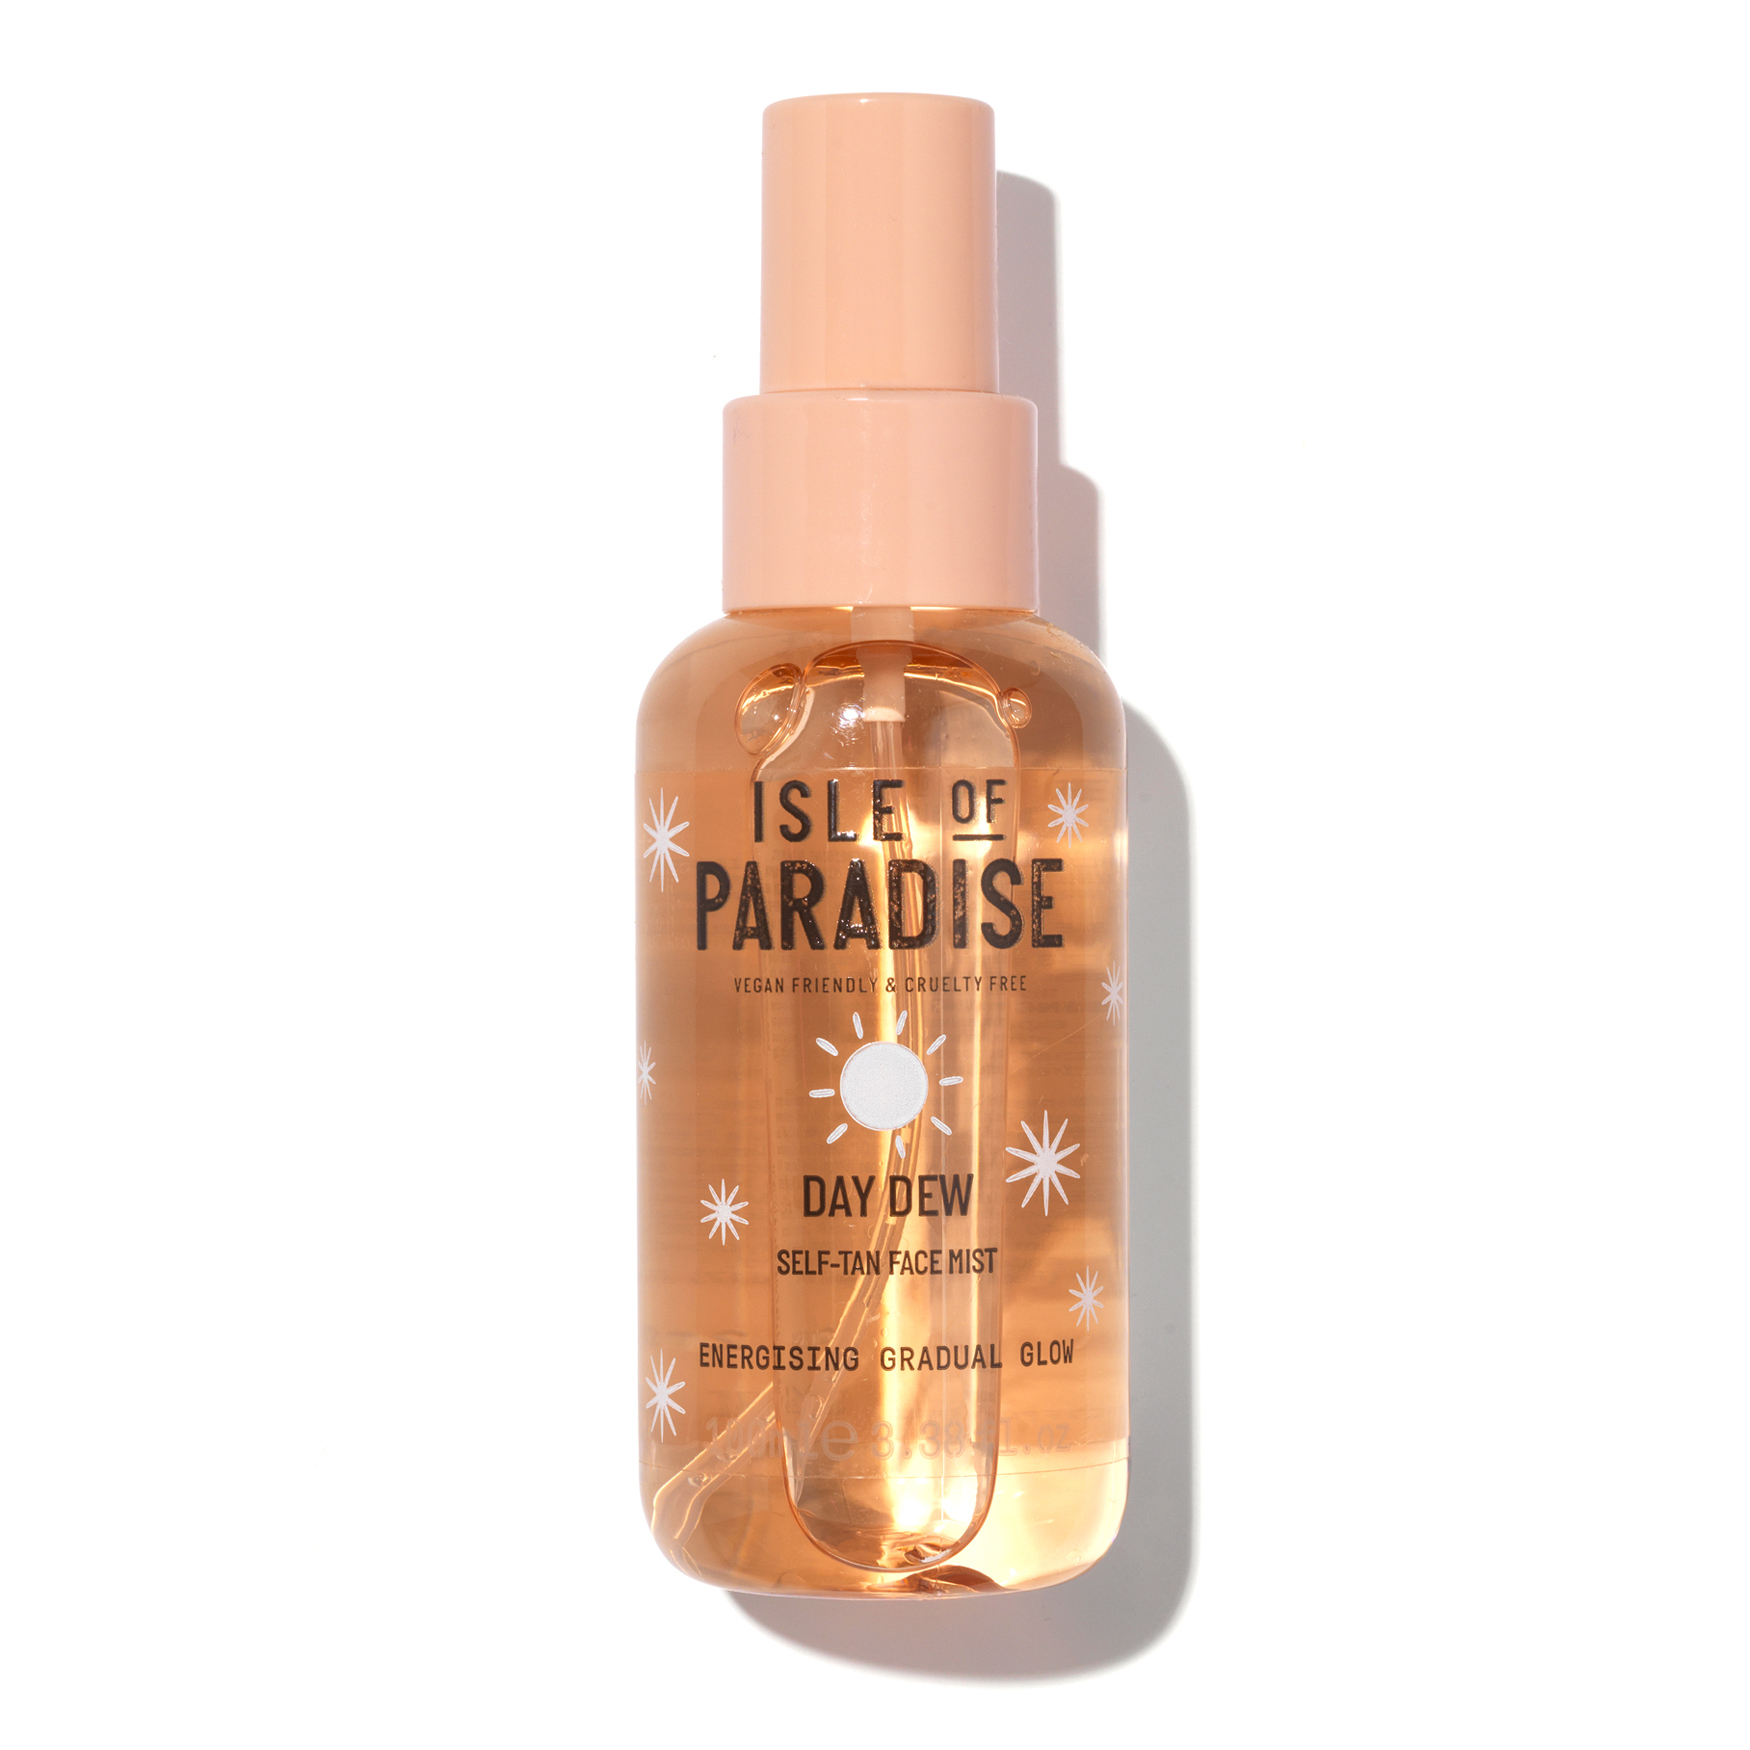 Isle of Paradise Day Dew Self Tan Face Mist